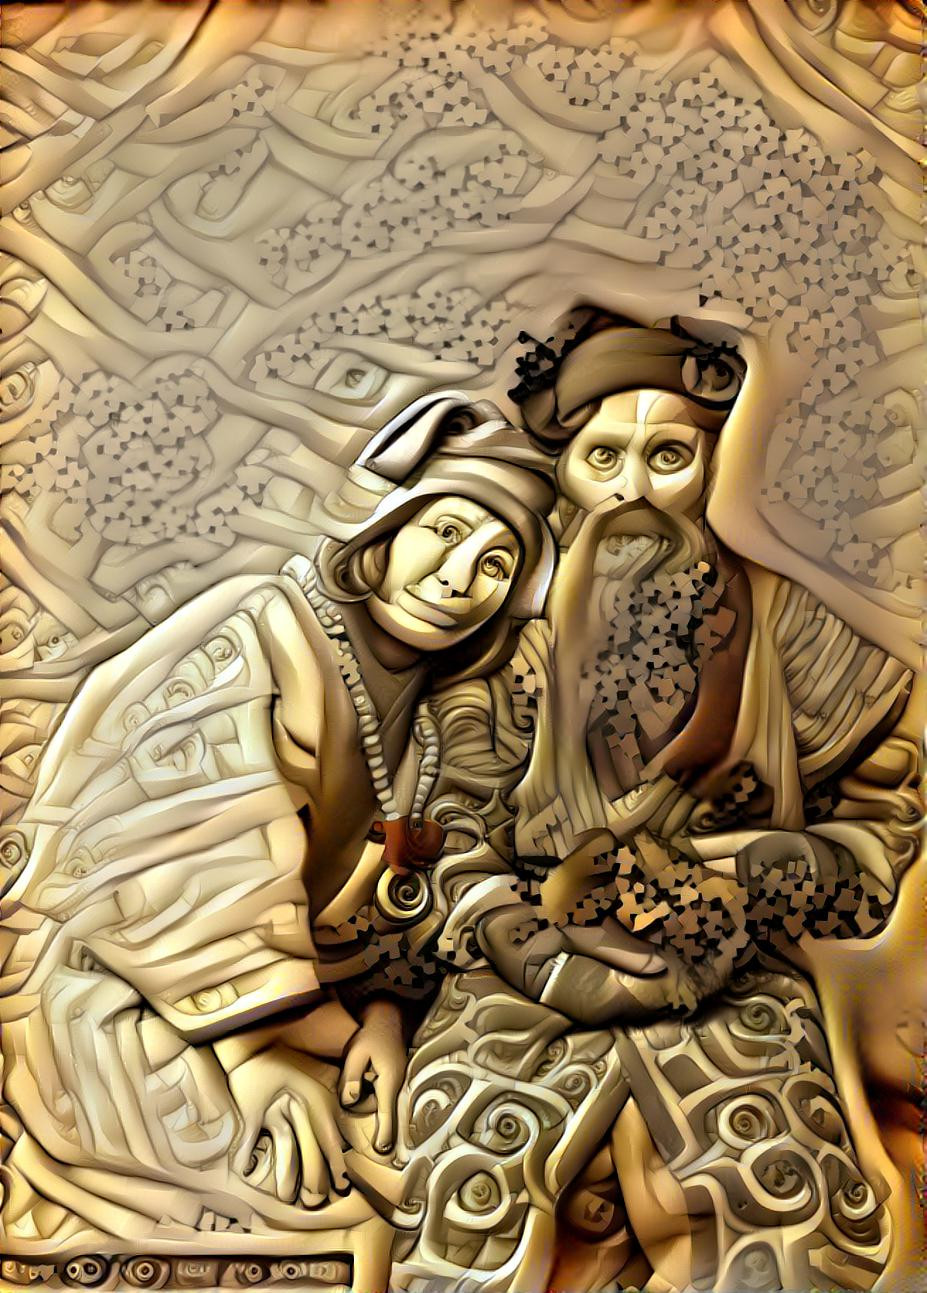 Old Ainu Woman and Man